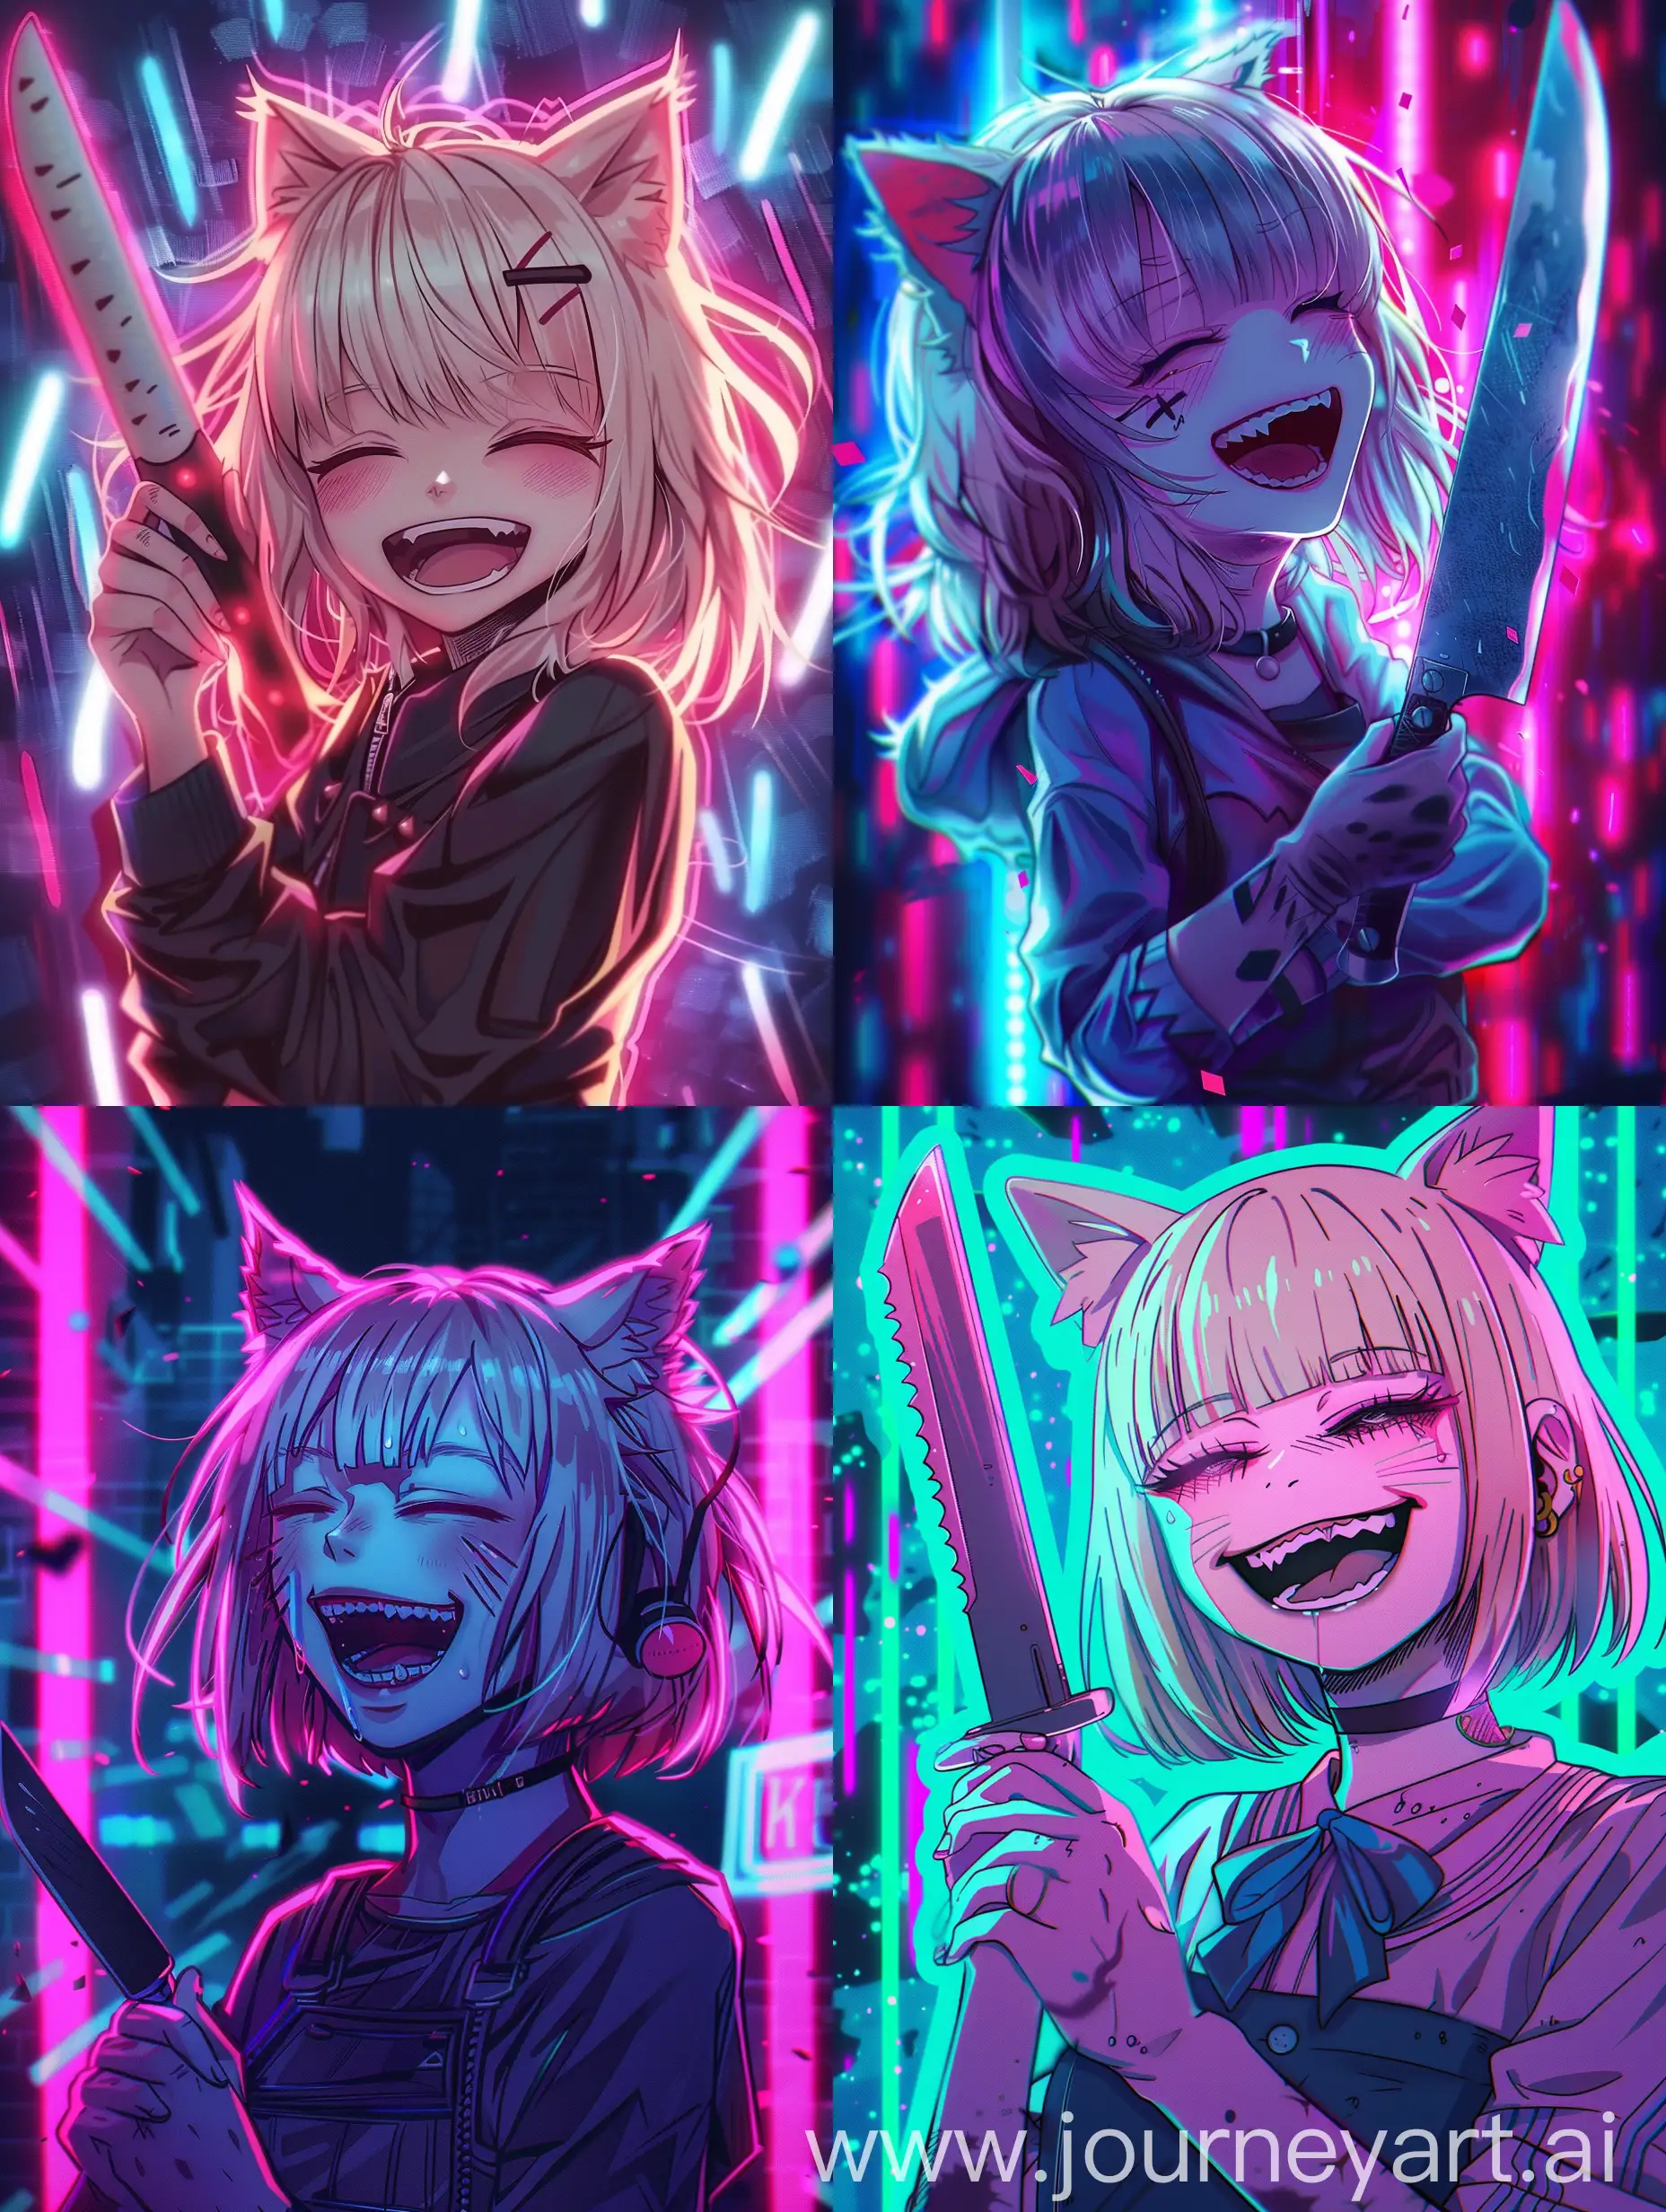 Anime girl with cat ears laughing, she holding a knife, with neon background 